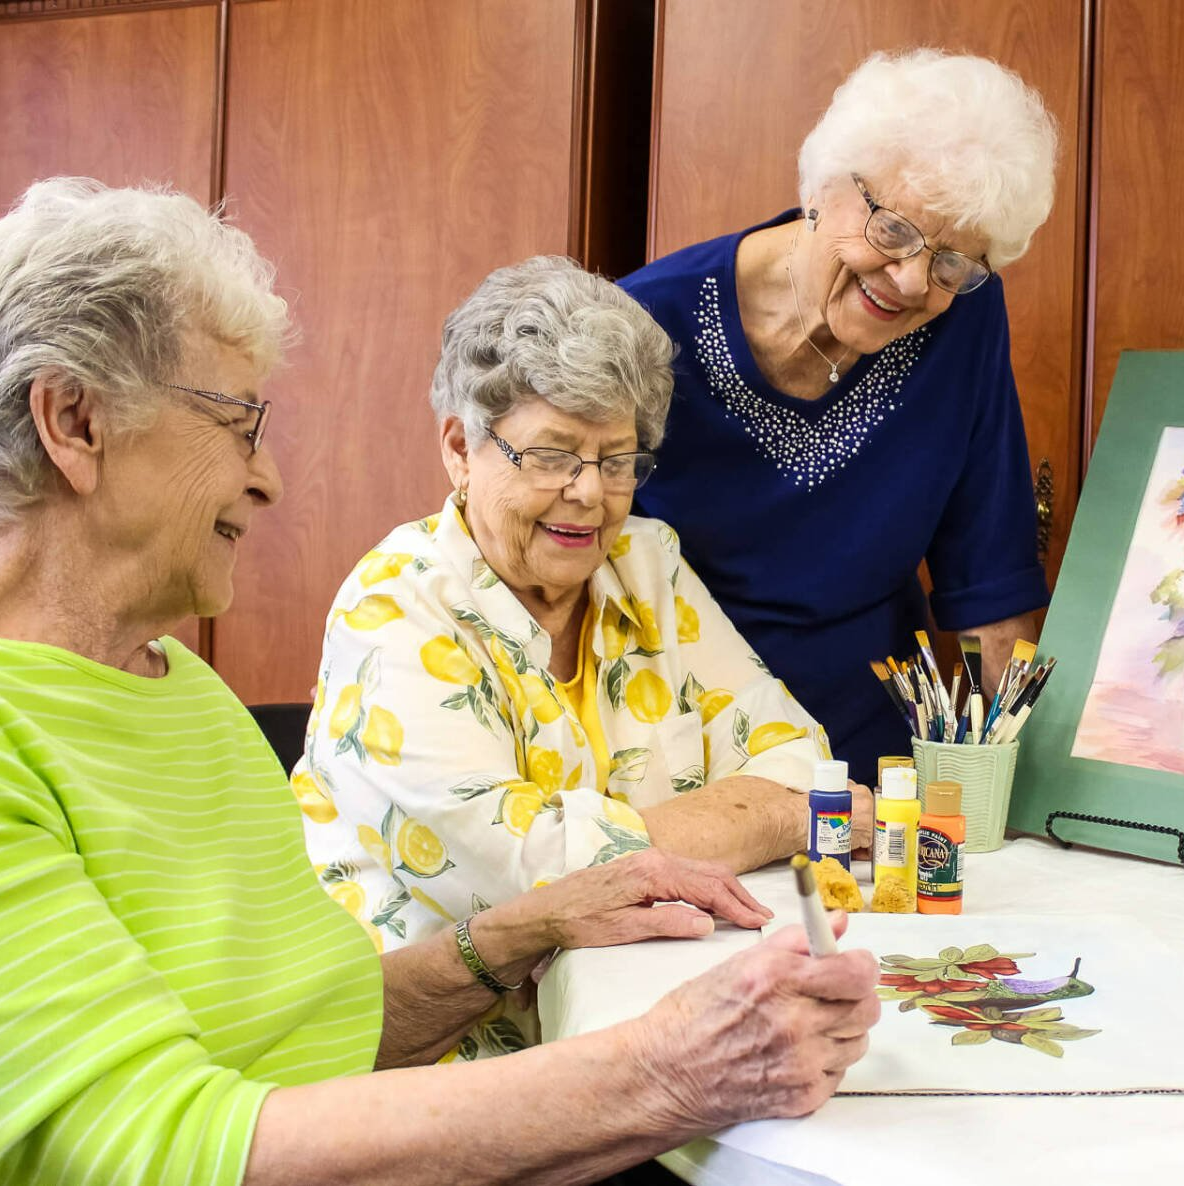 ladies painting a mural of flowers together in the Village Place craft room